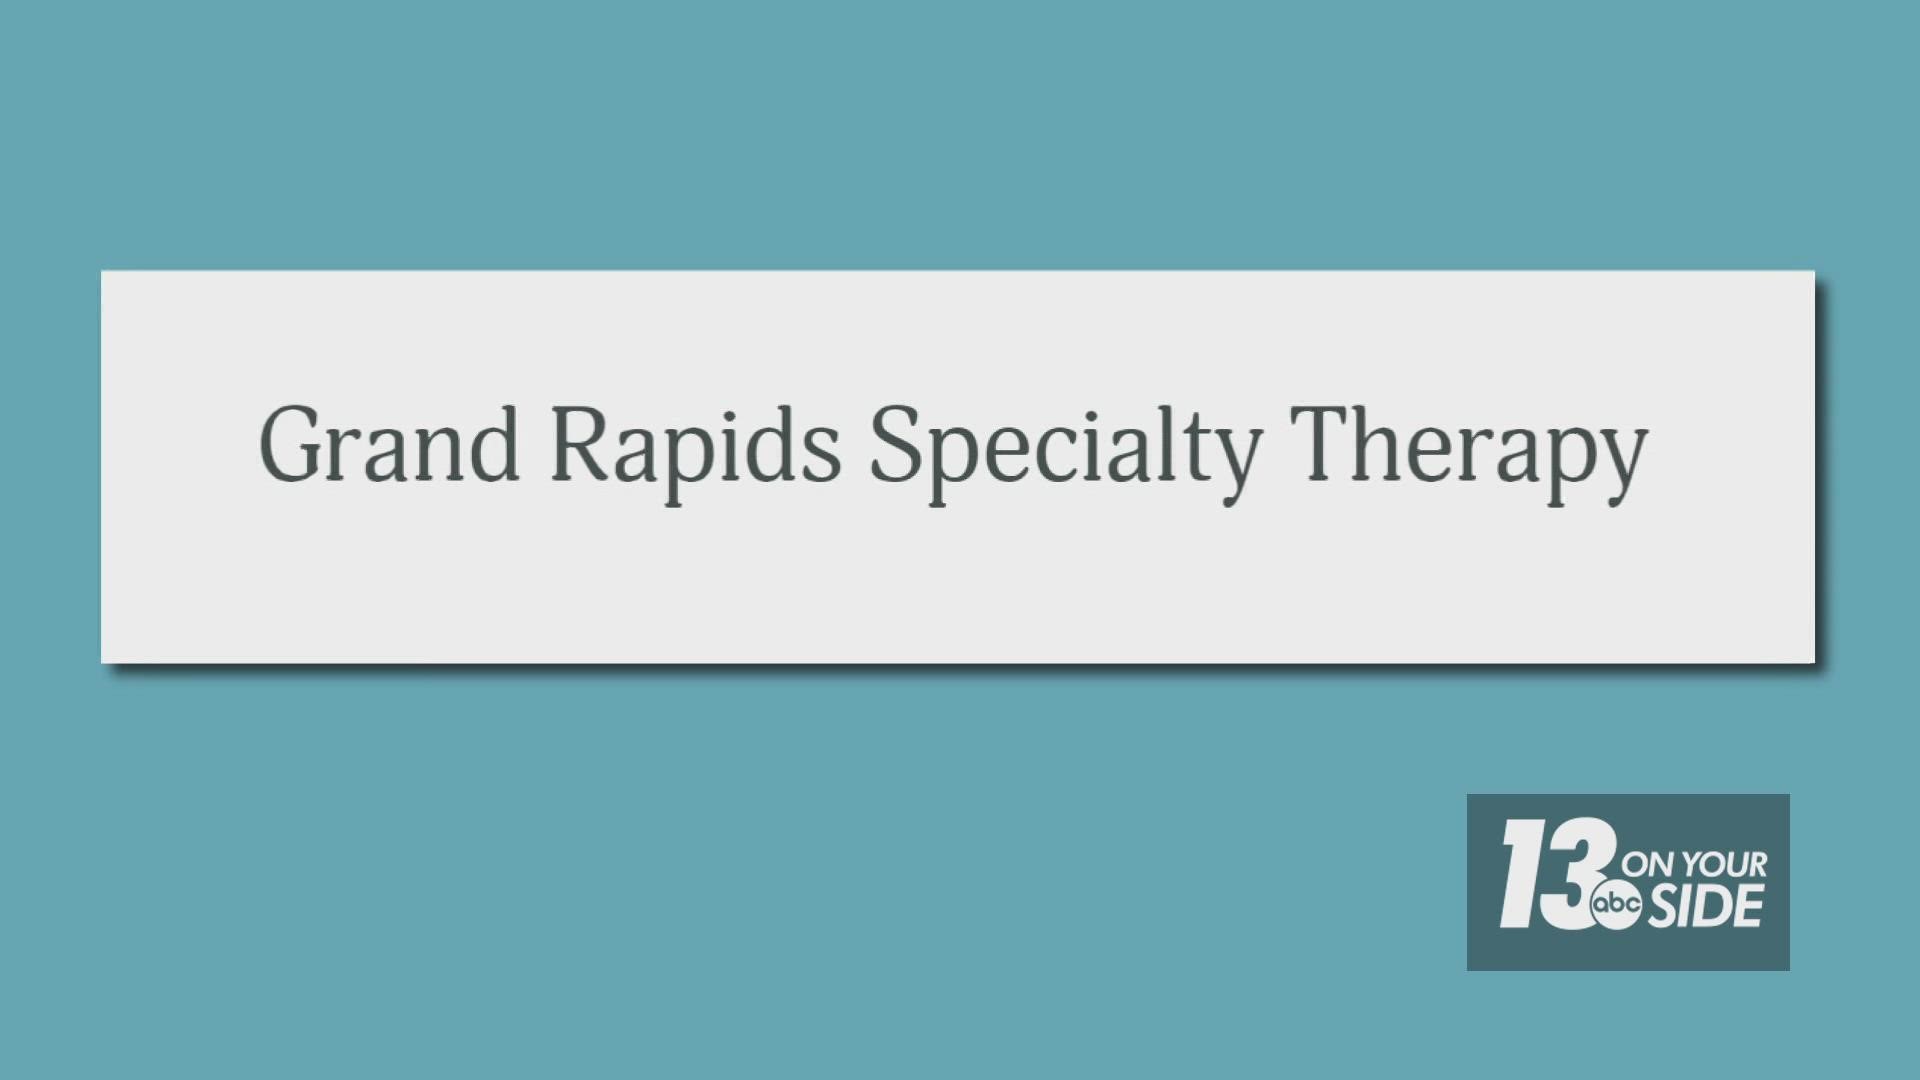 Grand Rapids Specialty Therapy exists in large part to address the inequity in mental health care access for the Queer community.